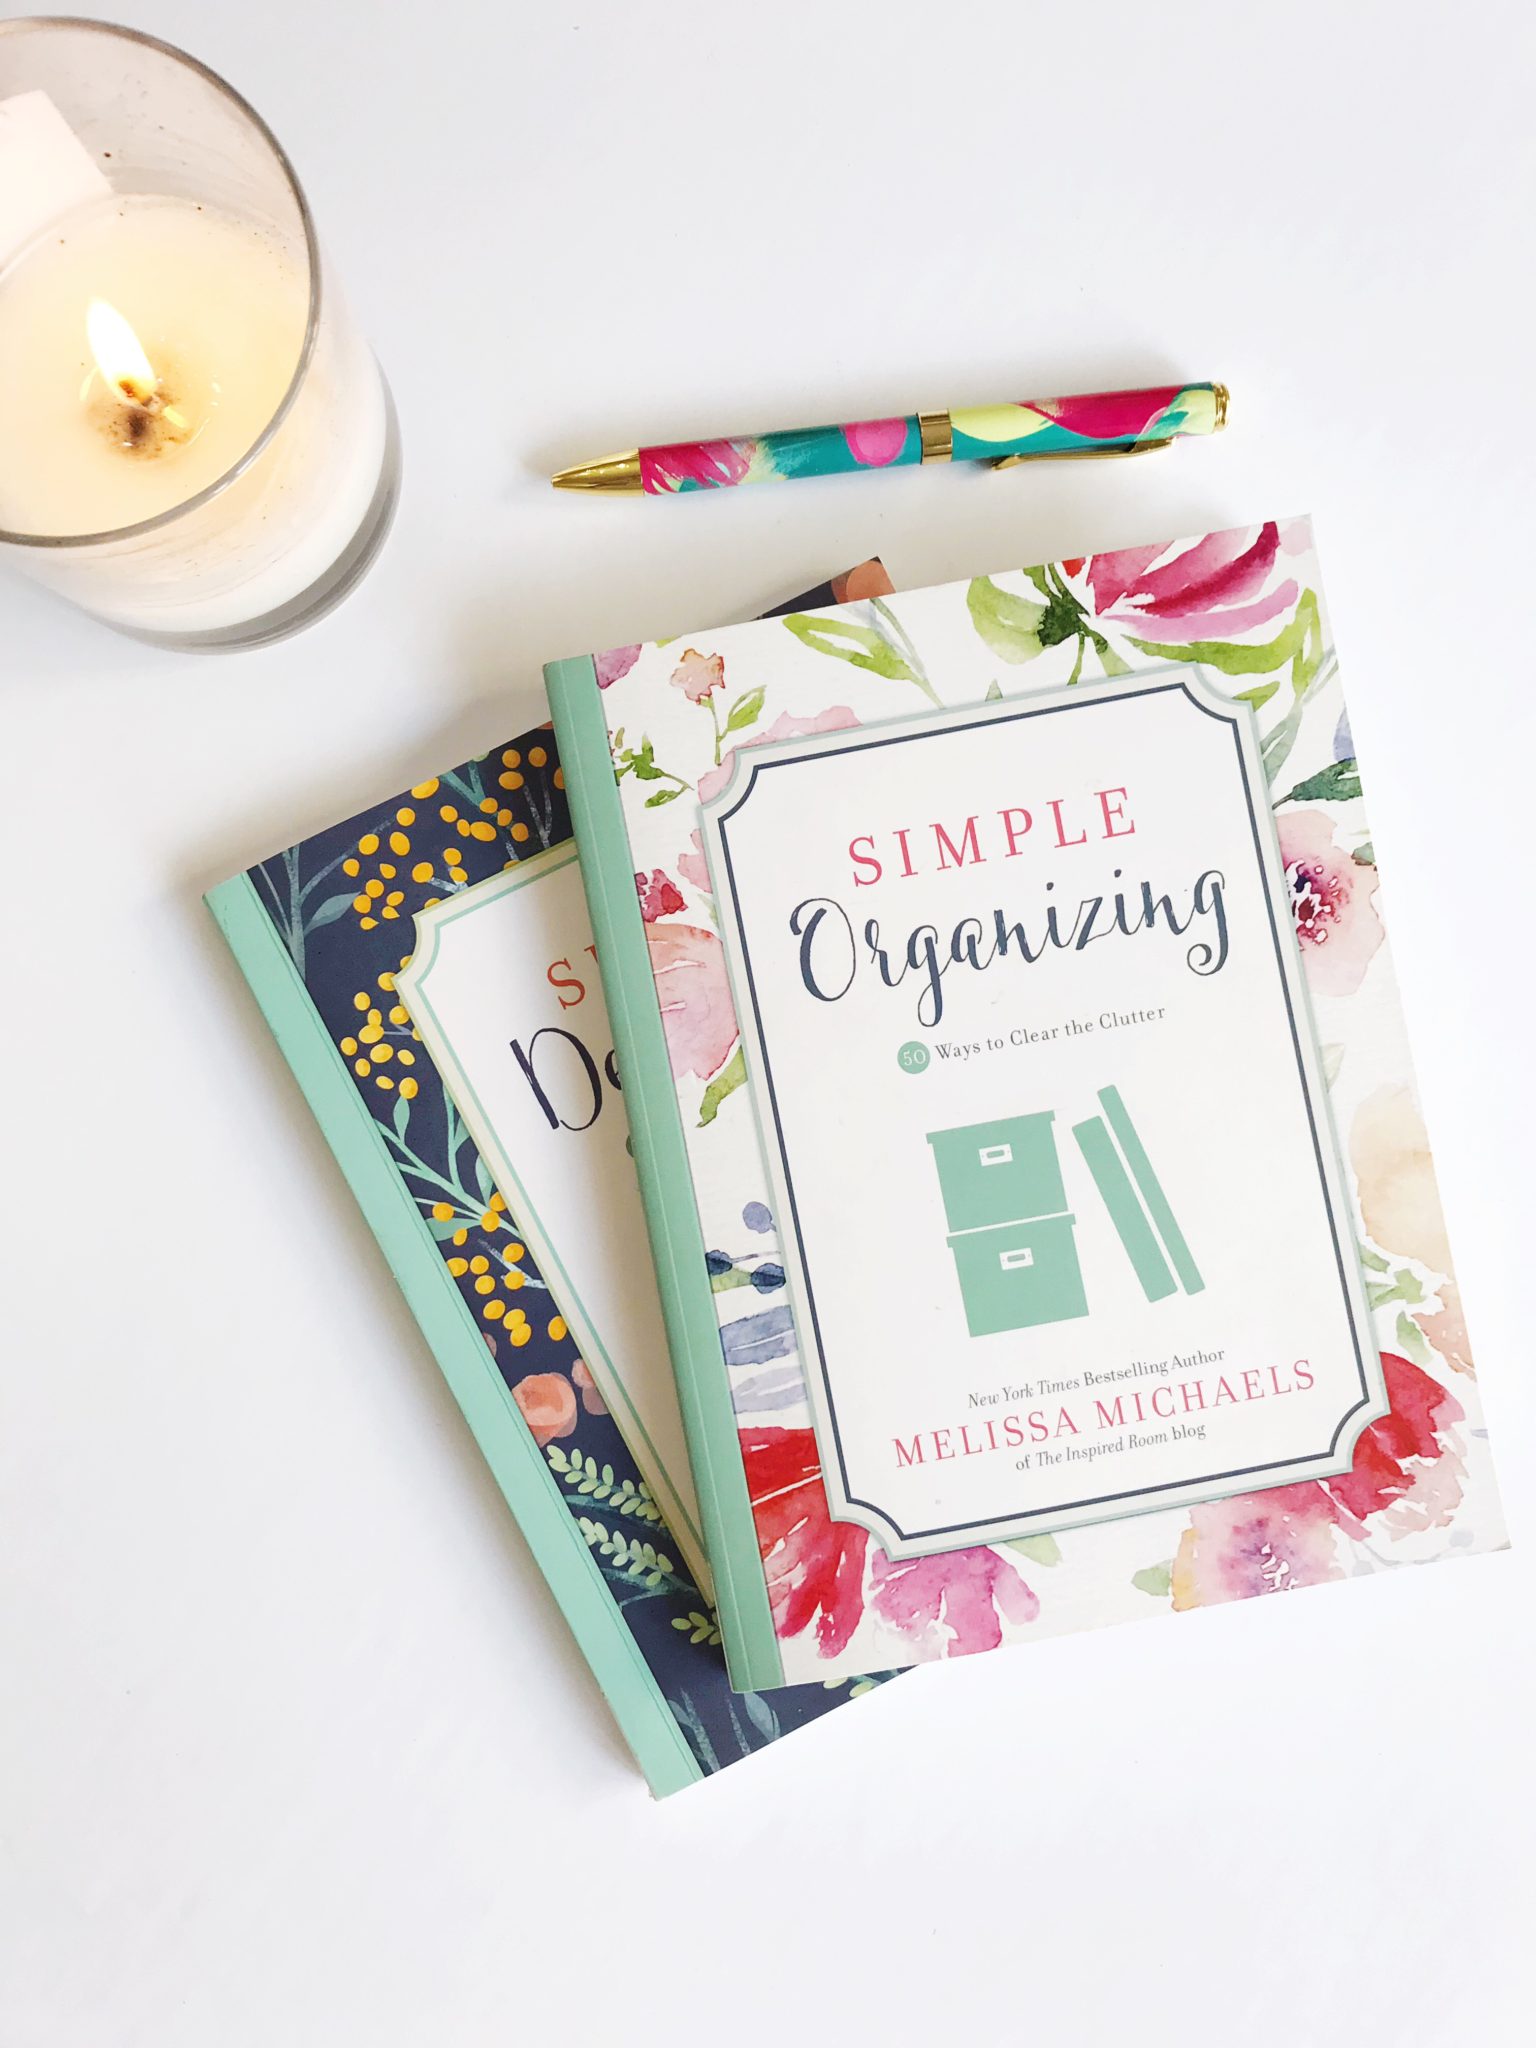 Simple Organizing by Melissa Michaels from the Inspired Room